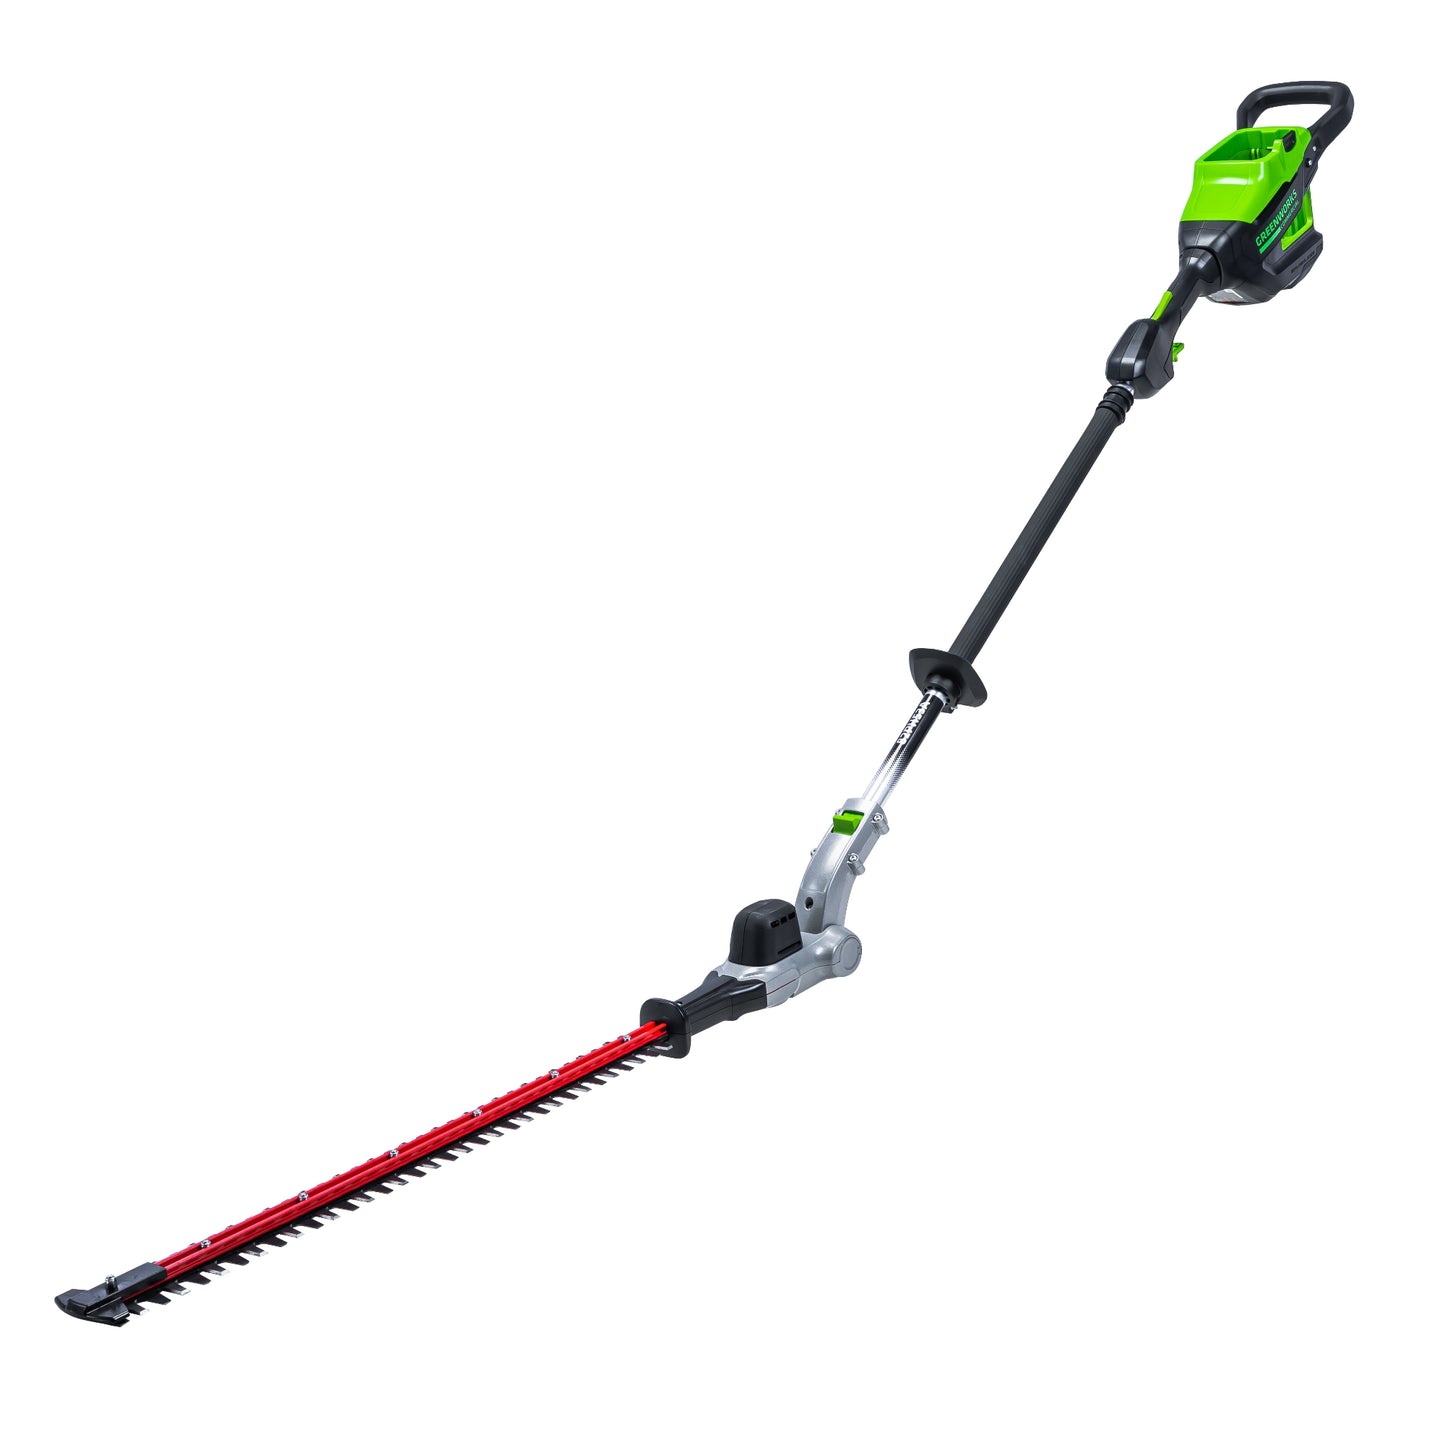 82PH53A 82V ARTICULATING MID-POLE HEDGE TRIMMER (TOOL ONLY)